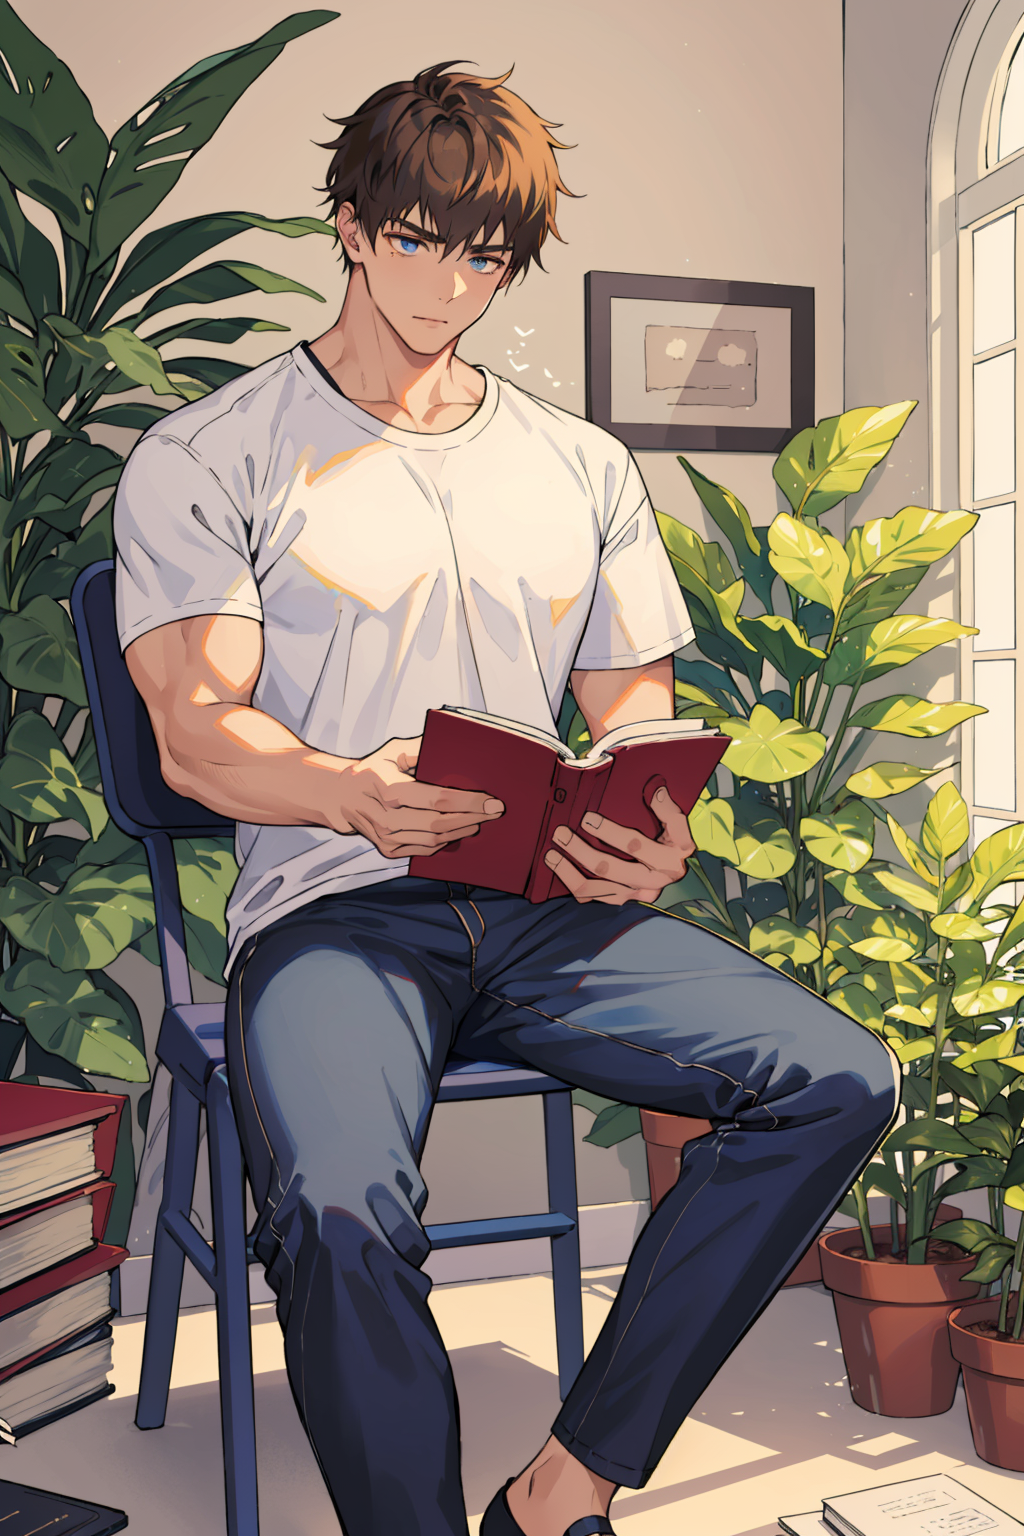 A man sitting on a chair reading a book in front of a potted plant.